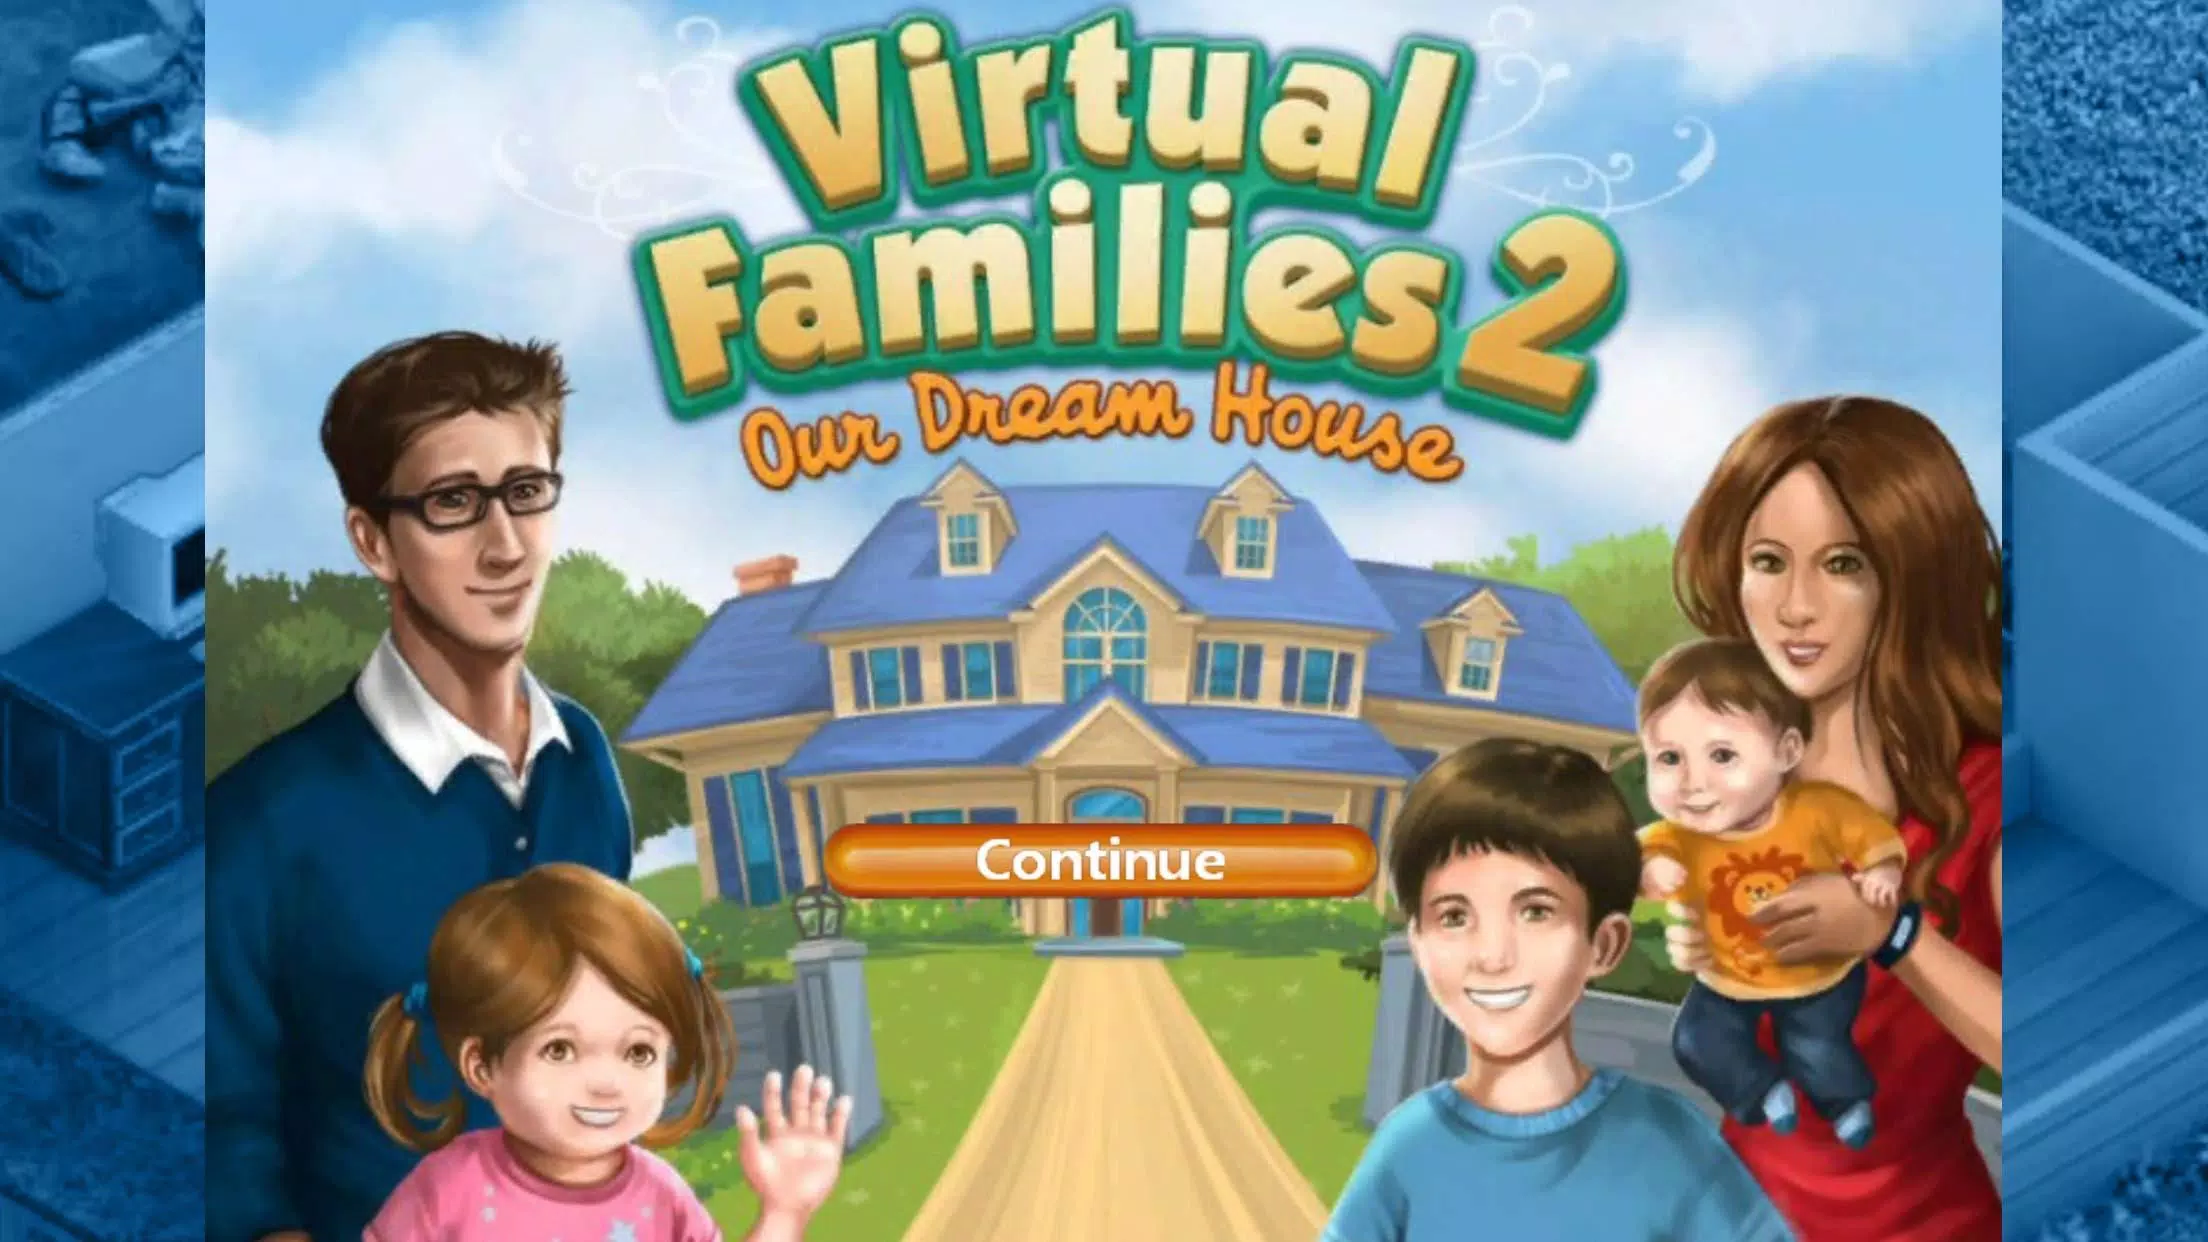 Download My Town Home: Family Playhouse APKs for Android - APKMirror